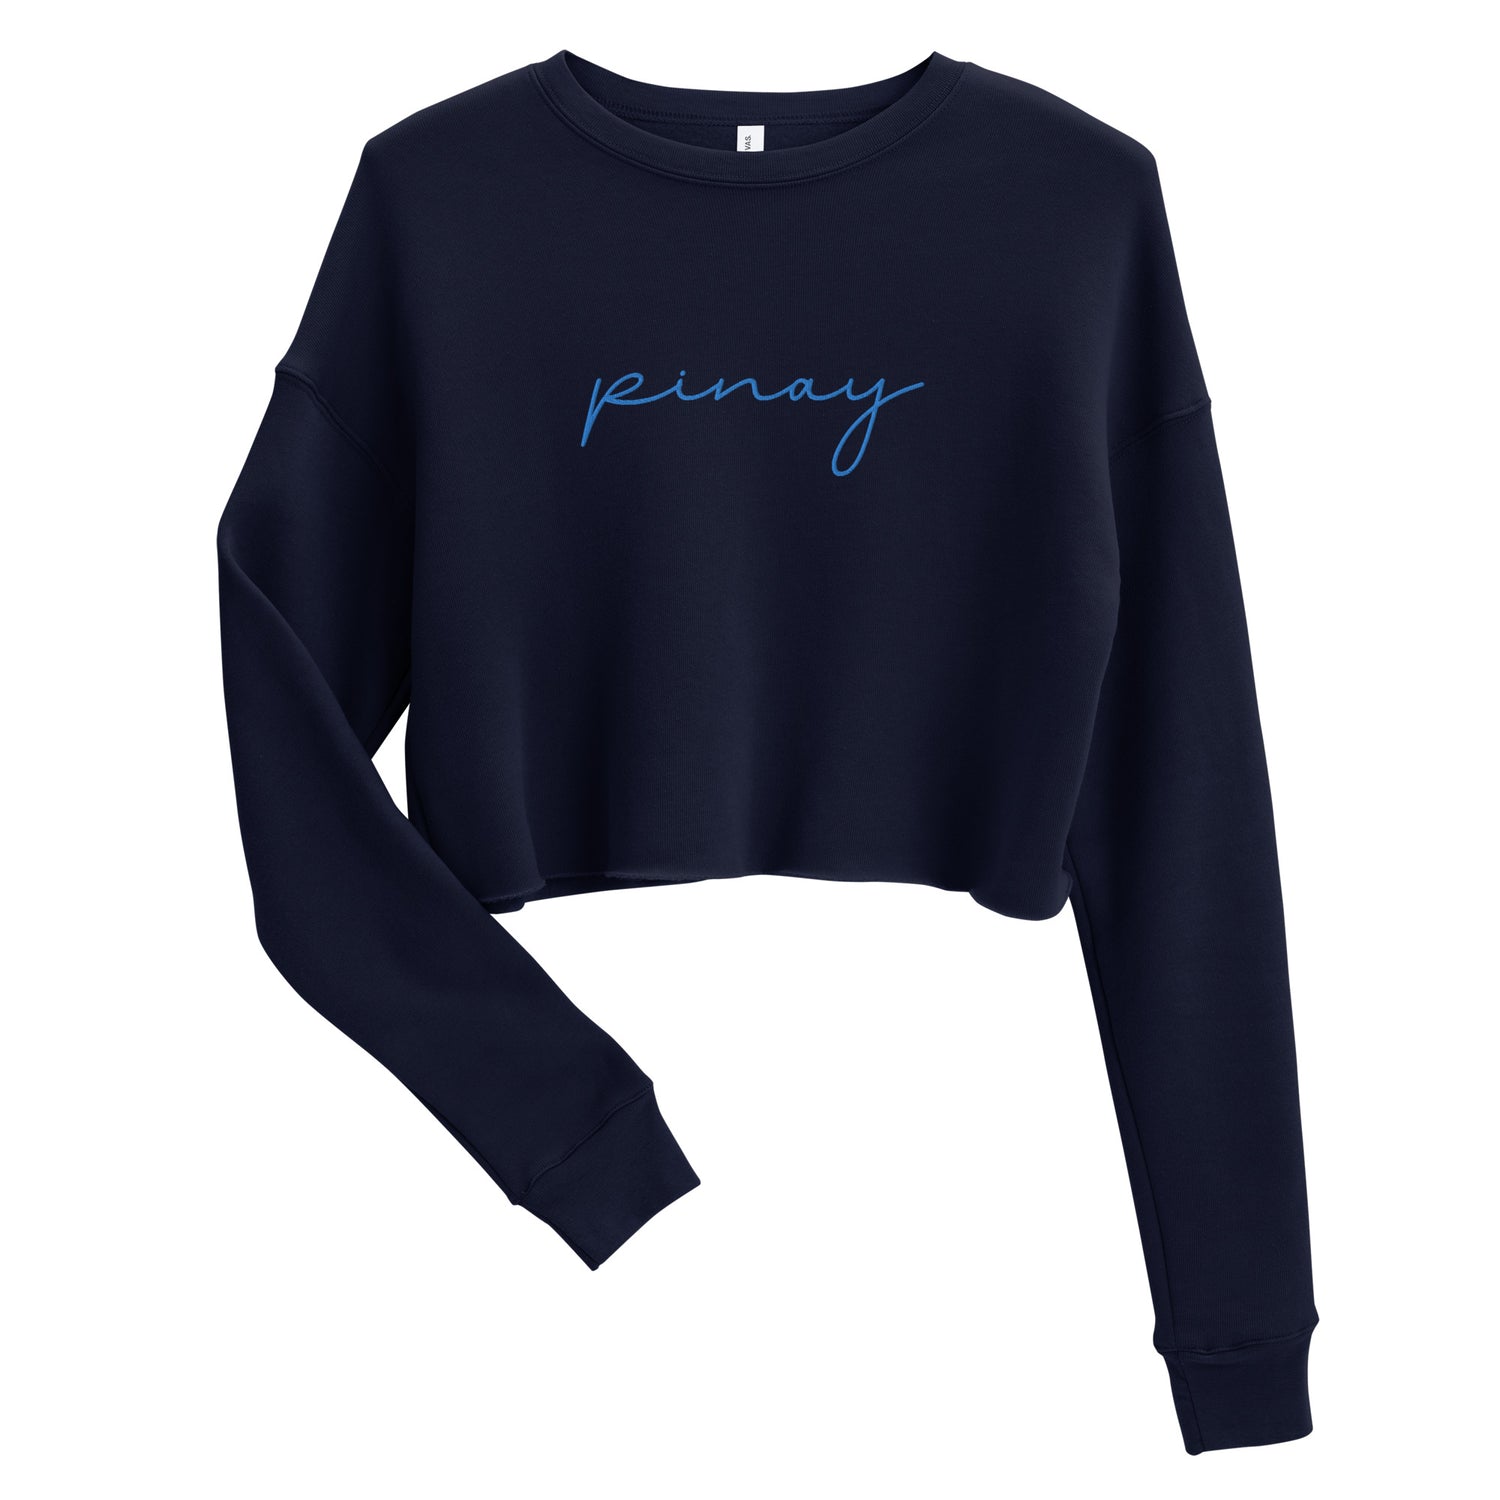 Filipino Crop Sweatshirt Pinay Statement Embroidered Merch in color variant Navy